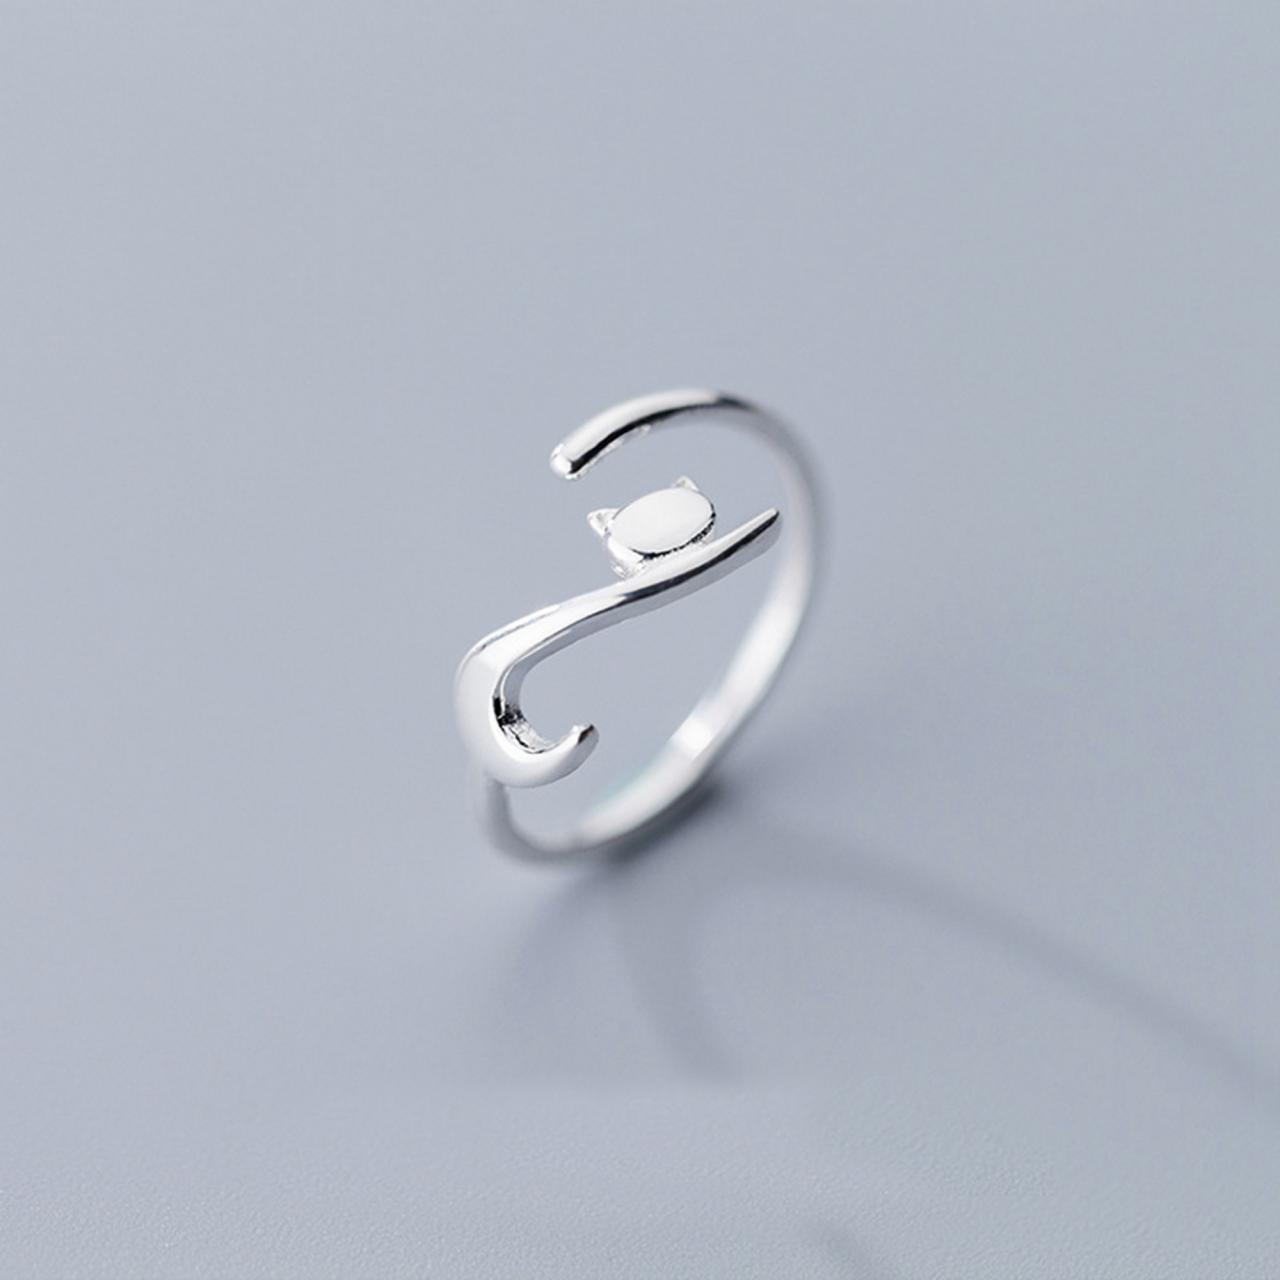 Cute Dainty Cat Ring, Sterling Silver Adjustable Cat Ring, Minimalist Rings, Women Ring, Everyday Jewelry